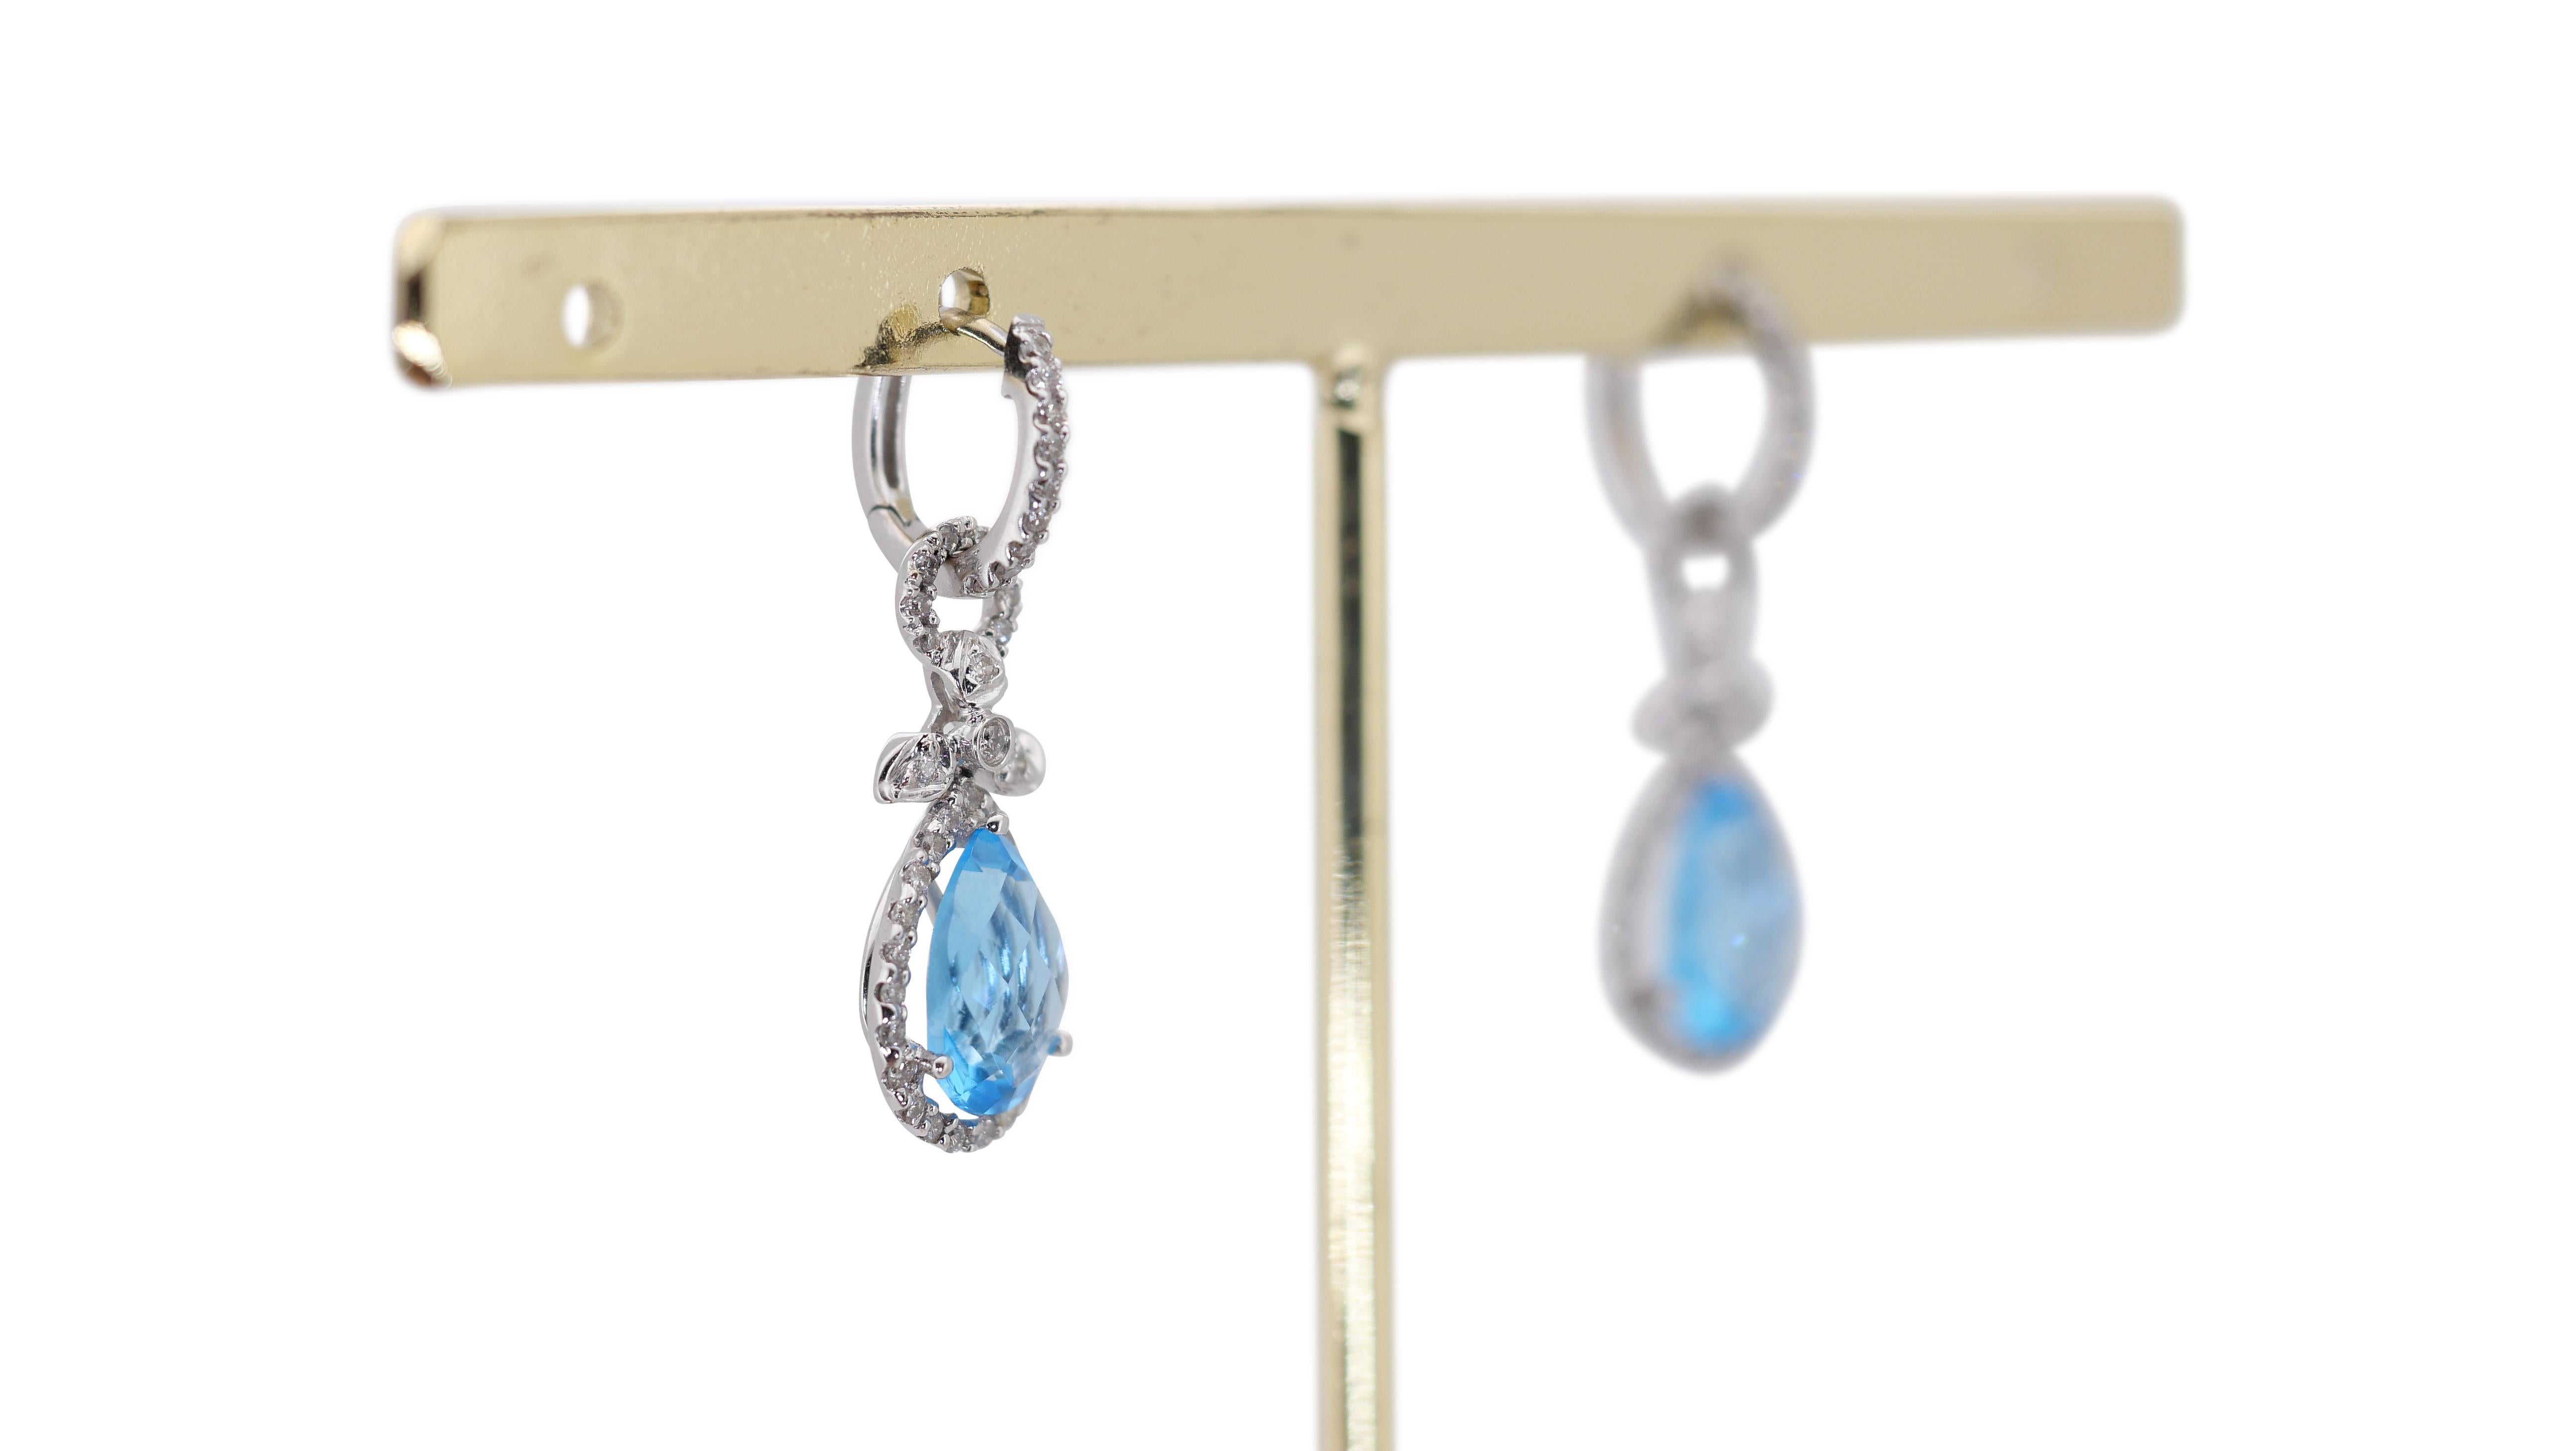 Luxurious 18k White Gold Dangle Earrings with 5 Carat Natural Topaz and Diamonds 2